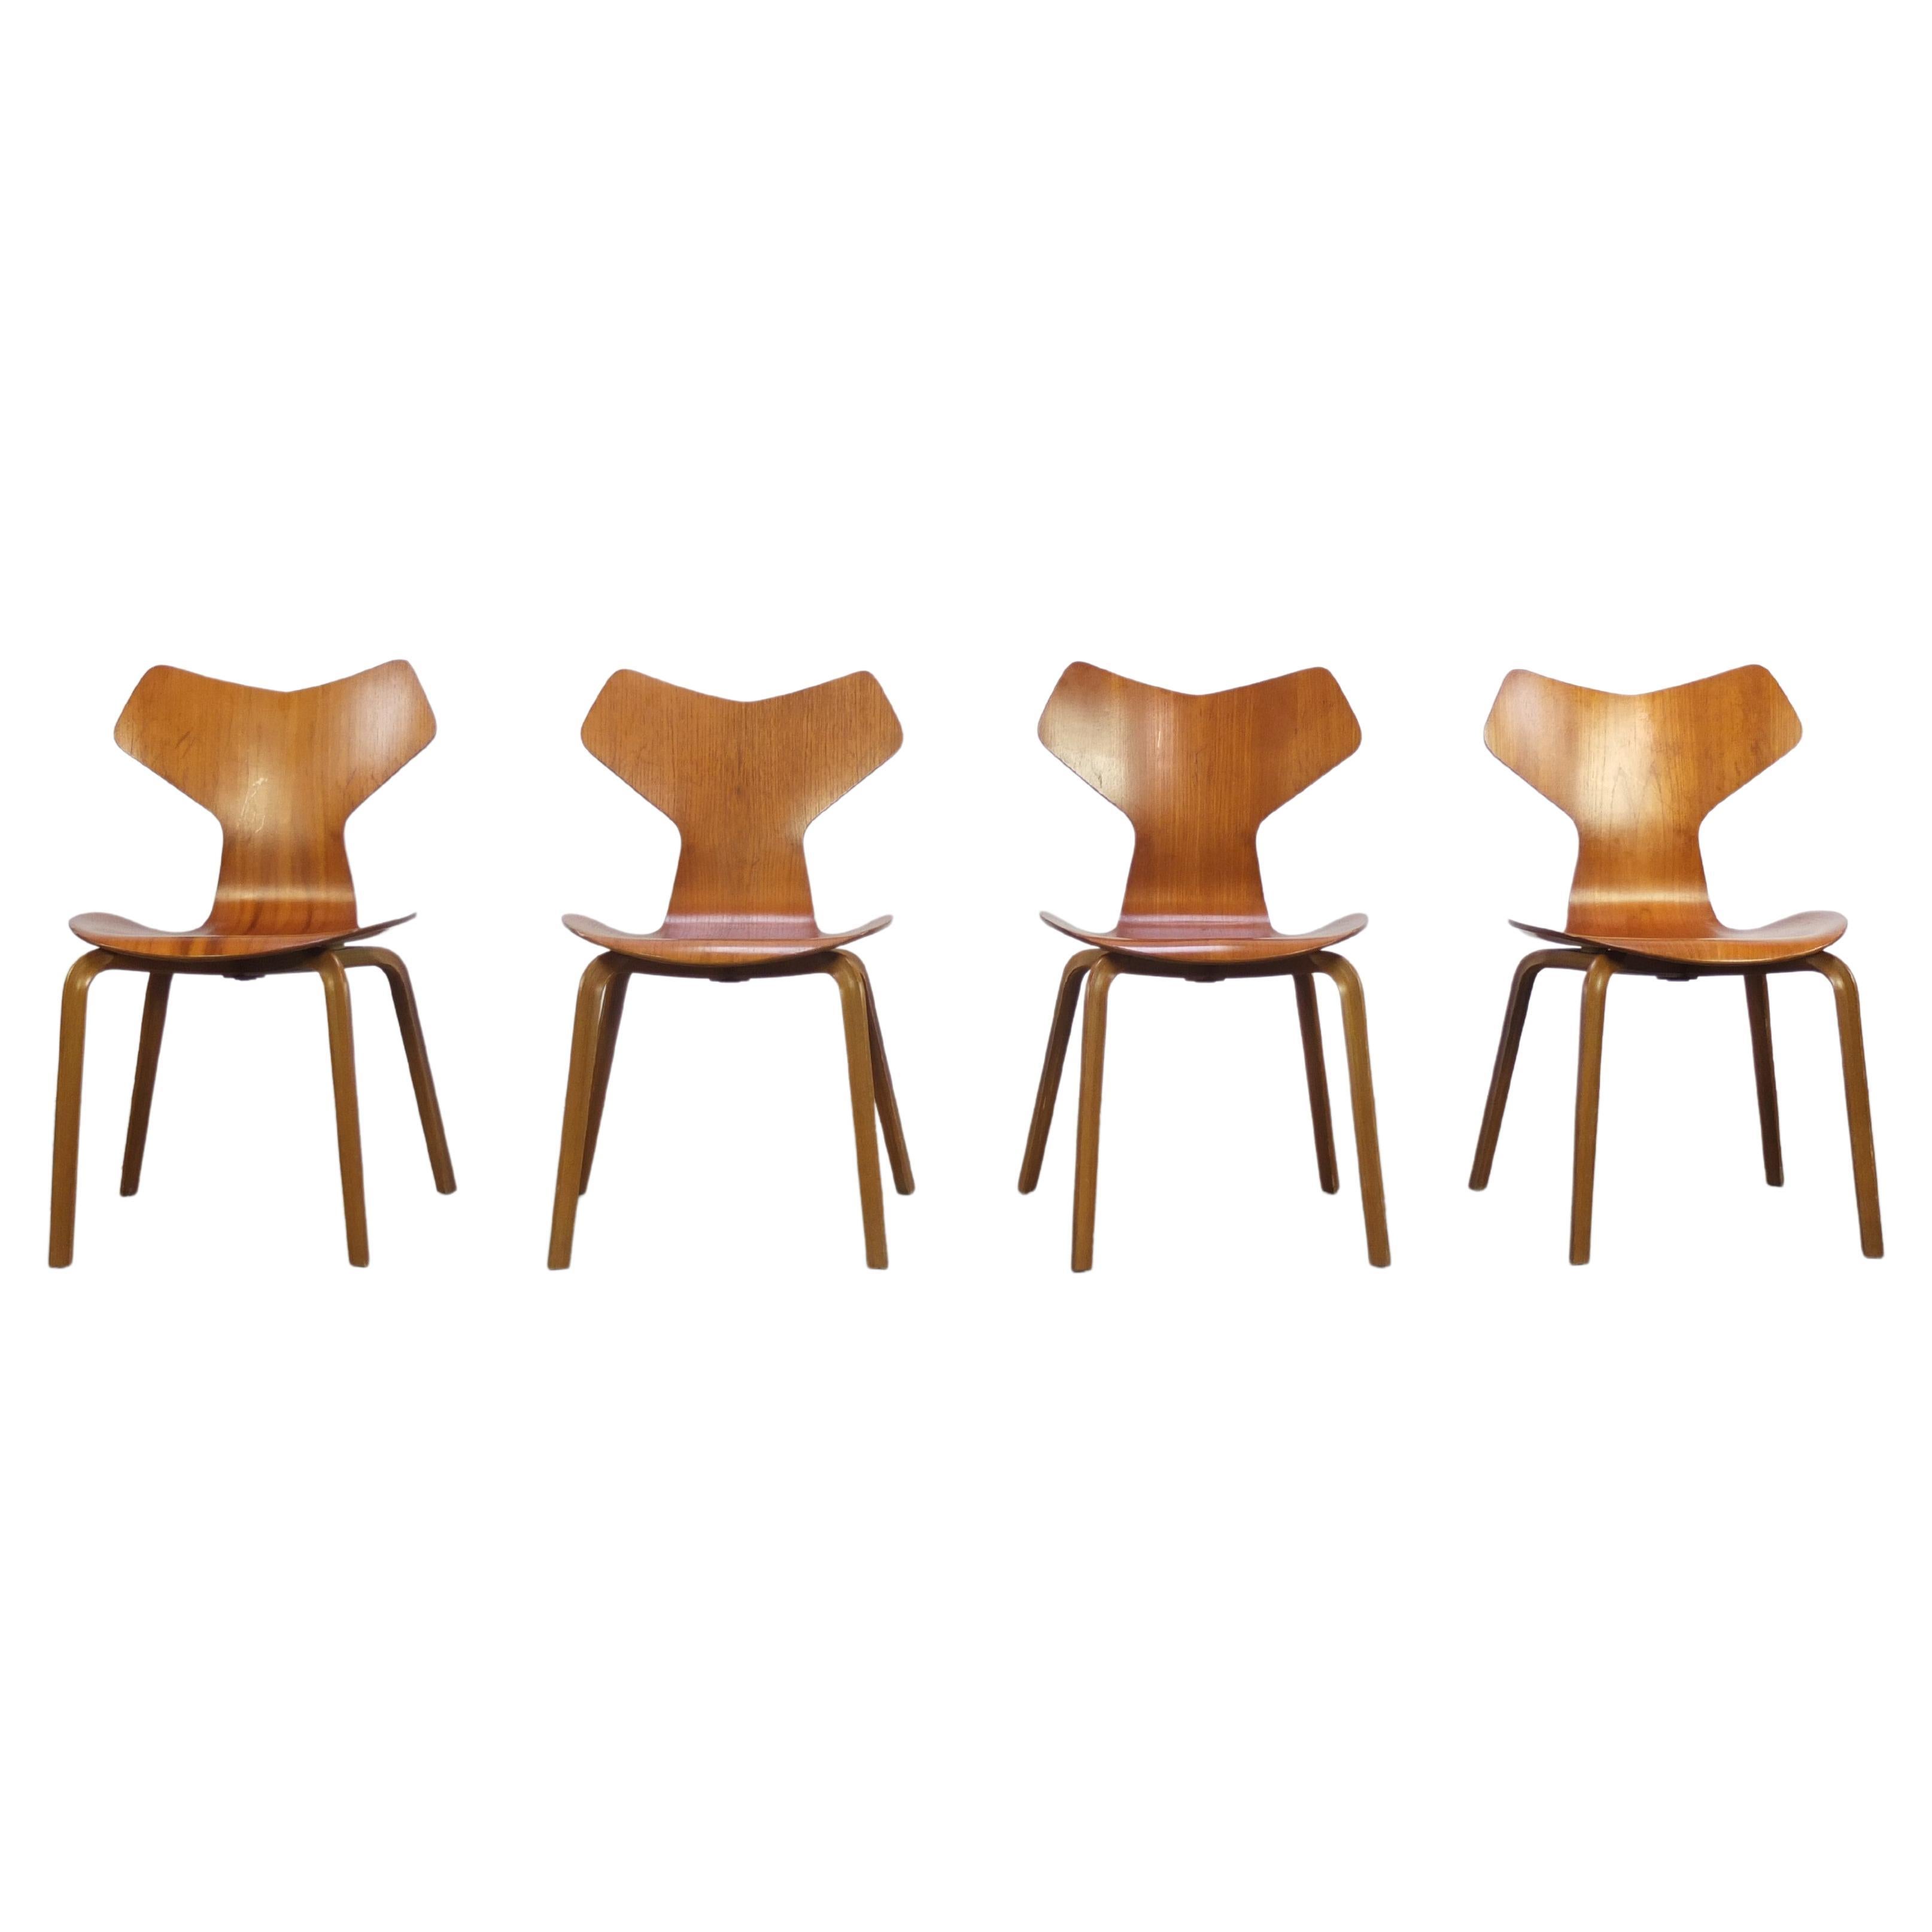 Rare Set of 4 'Grand Prix' Dining Chairs by Arne Jacobsen for Fritz Hansen, 1957